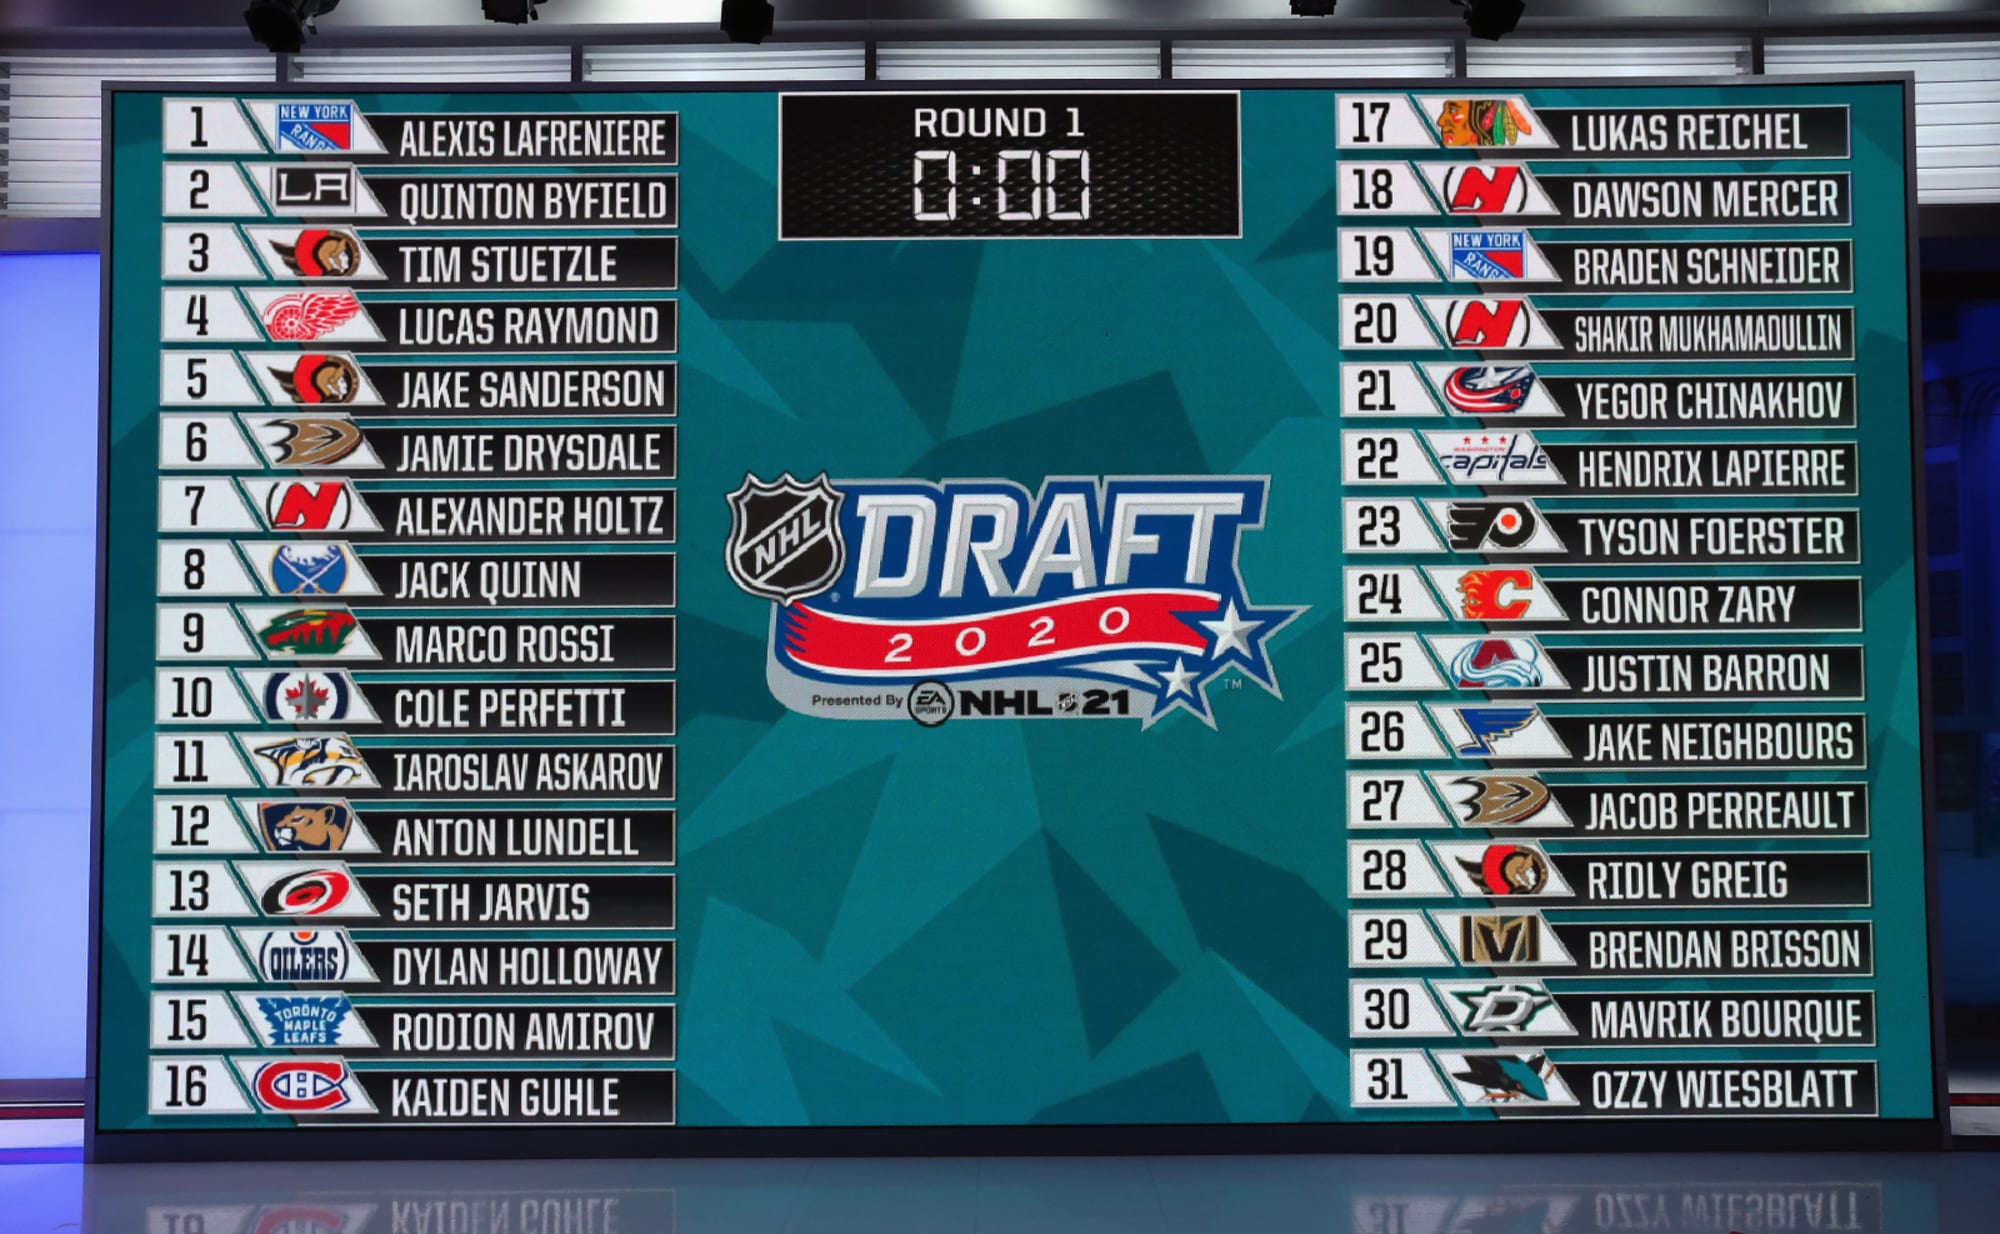 Possible New York Rangers picks in the 1st round of the NHL Entry Draft